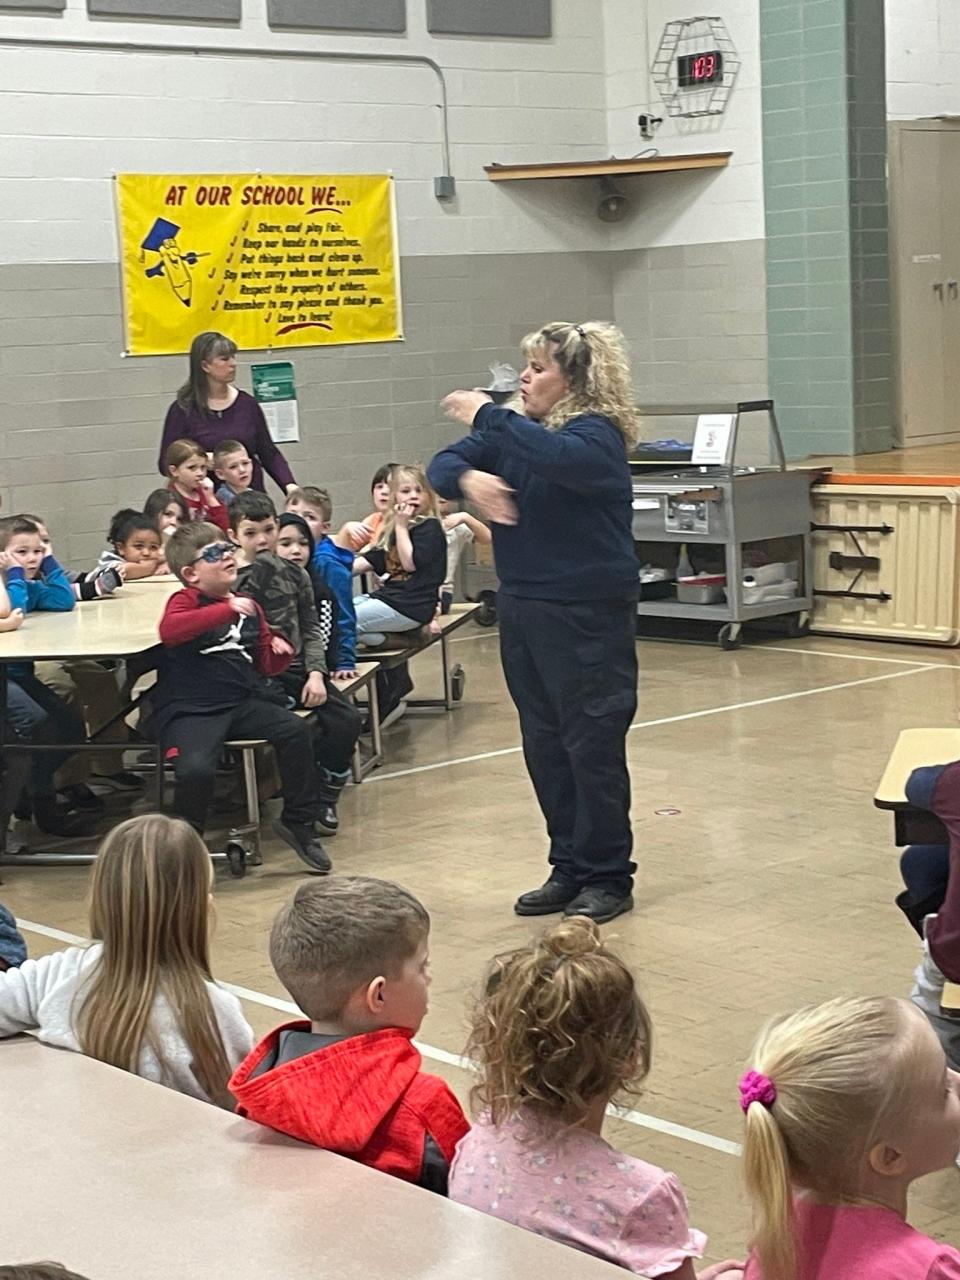 Heather Stein-Wells of the Newcomerstown Fire Department visited the Newcomerstown East Elementary recently to talk to students about fire safety and give a look at a fire suit worn by firefighters. With a donation from Light in the Valley ministries, the school was able to send students home with a ready-to-install smoke detector. For assistance to install, families can call Ed Rexroad at 740-876-1726.